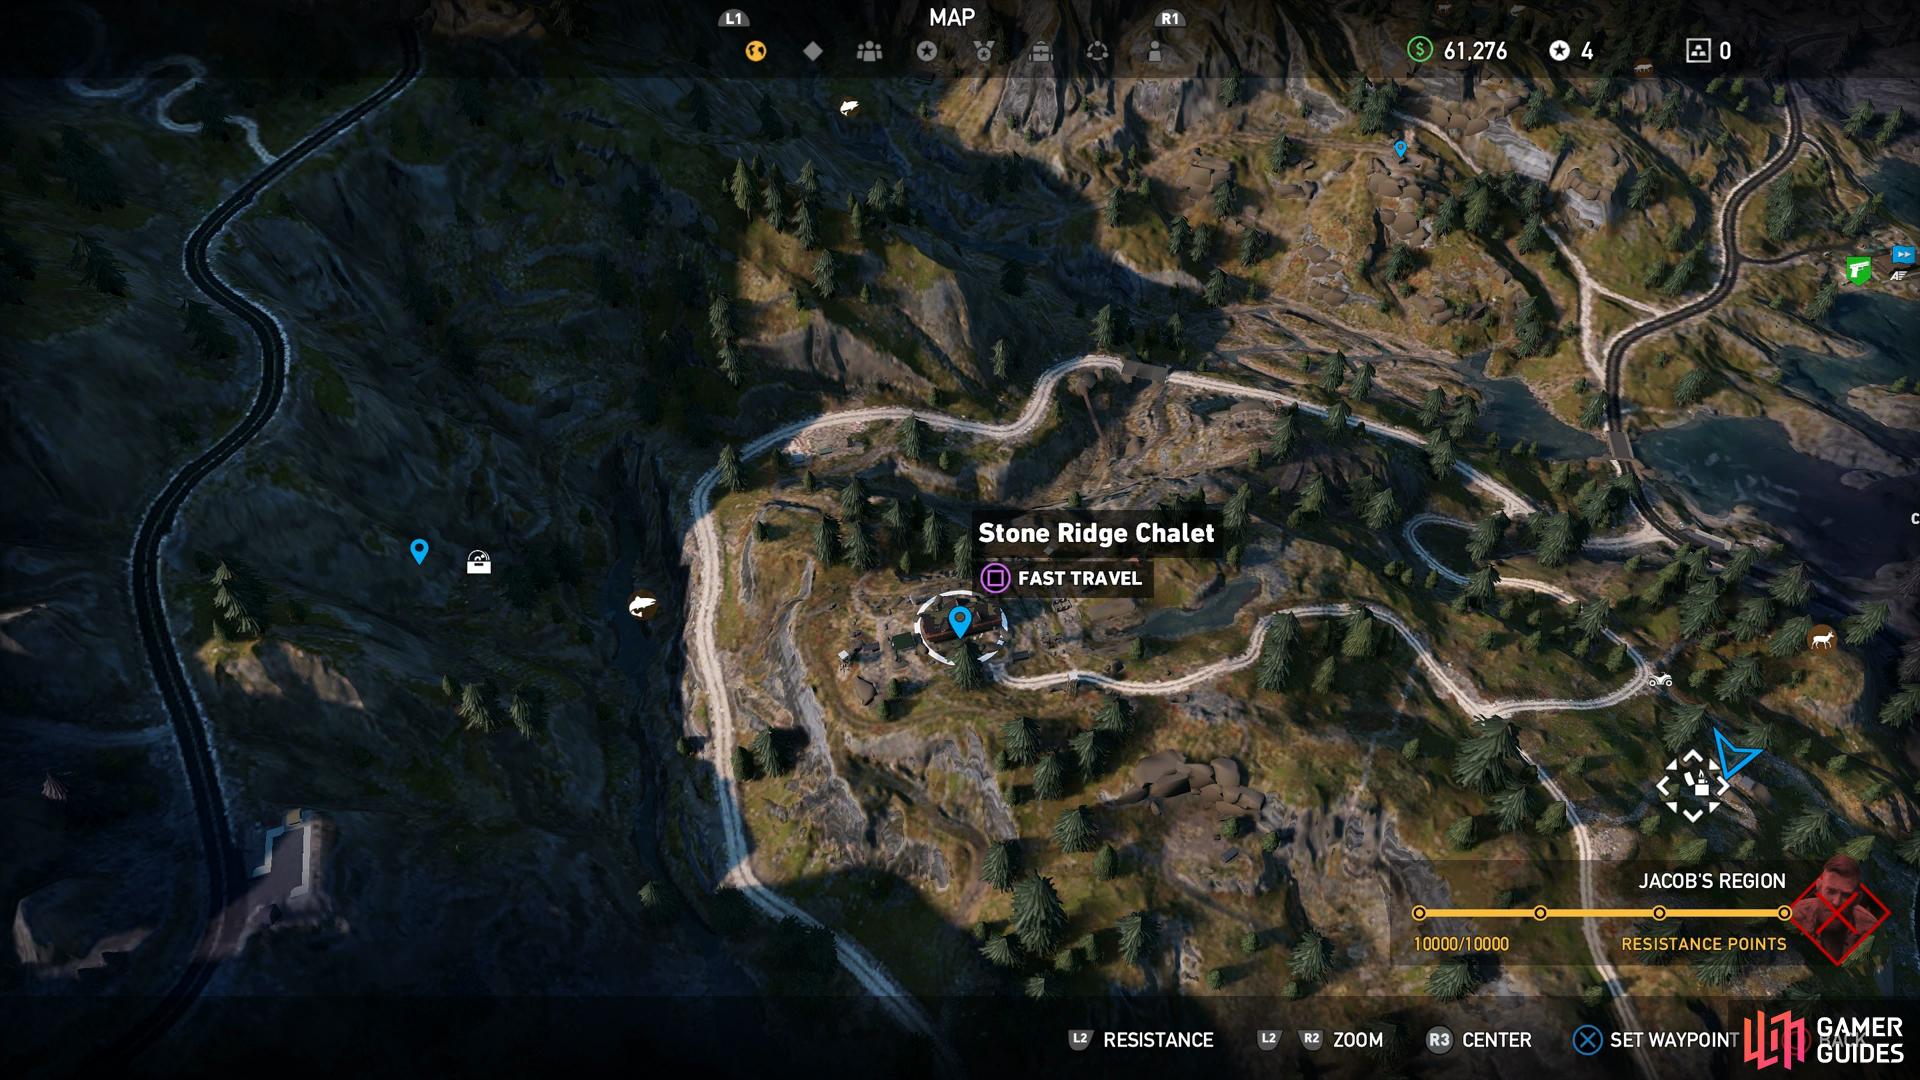 Youll need to travel southeast from Stone Ridge Chalet to reach the bunker